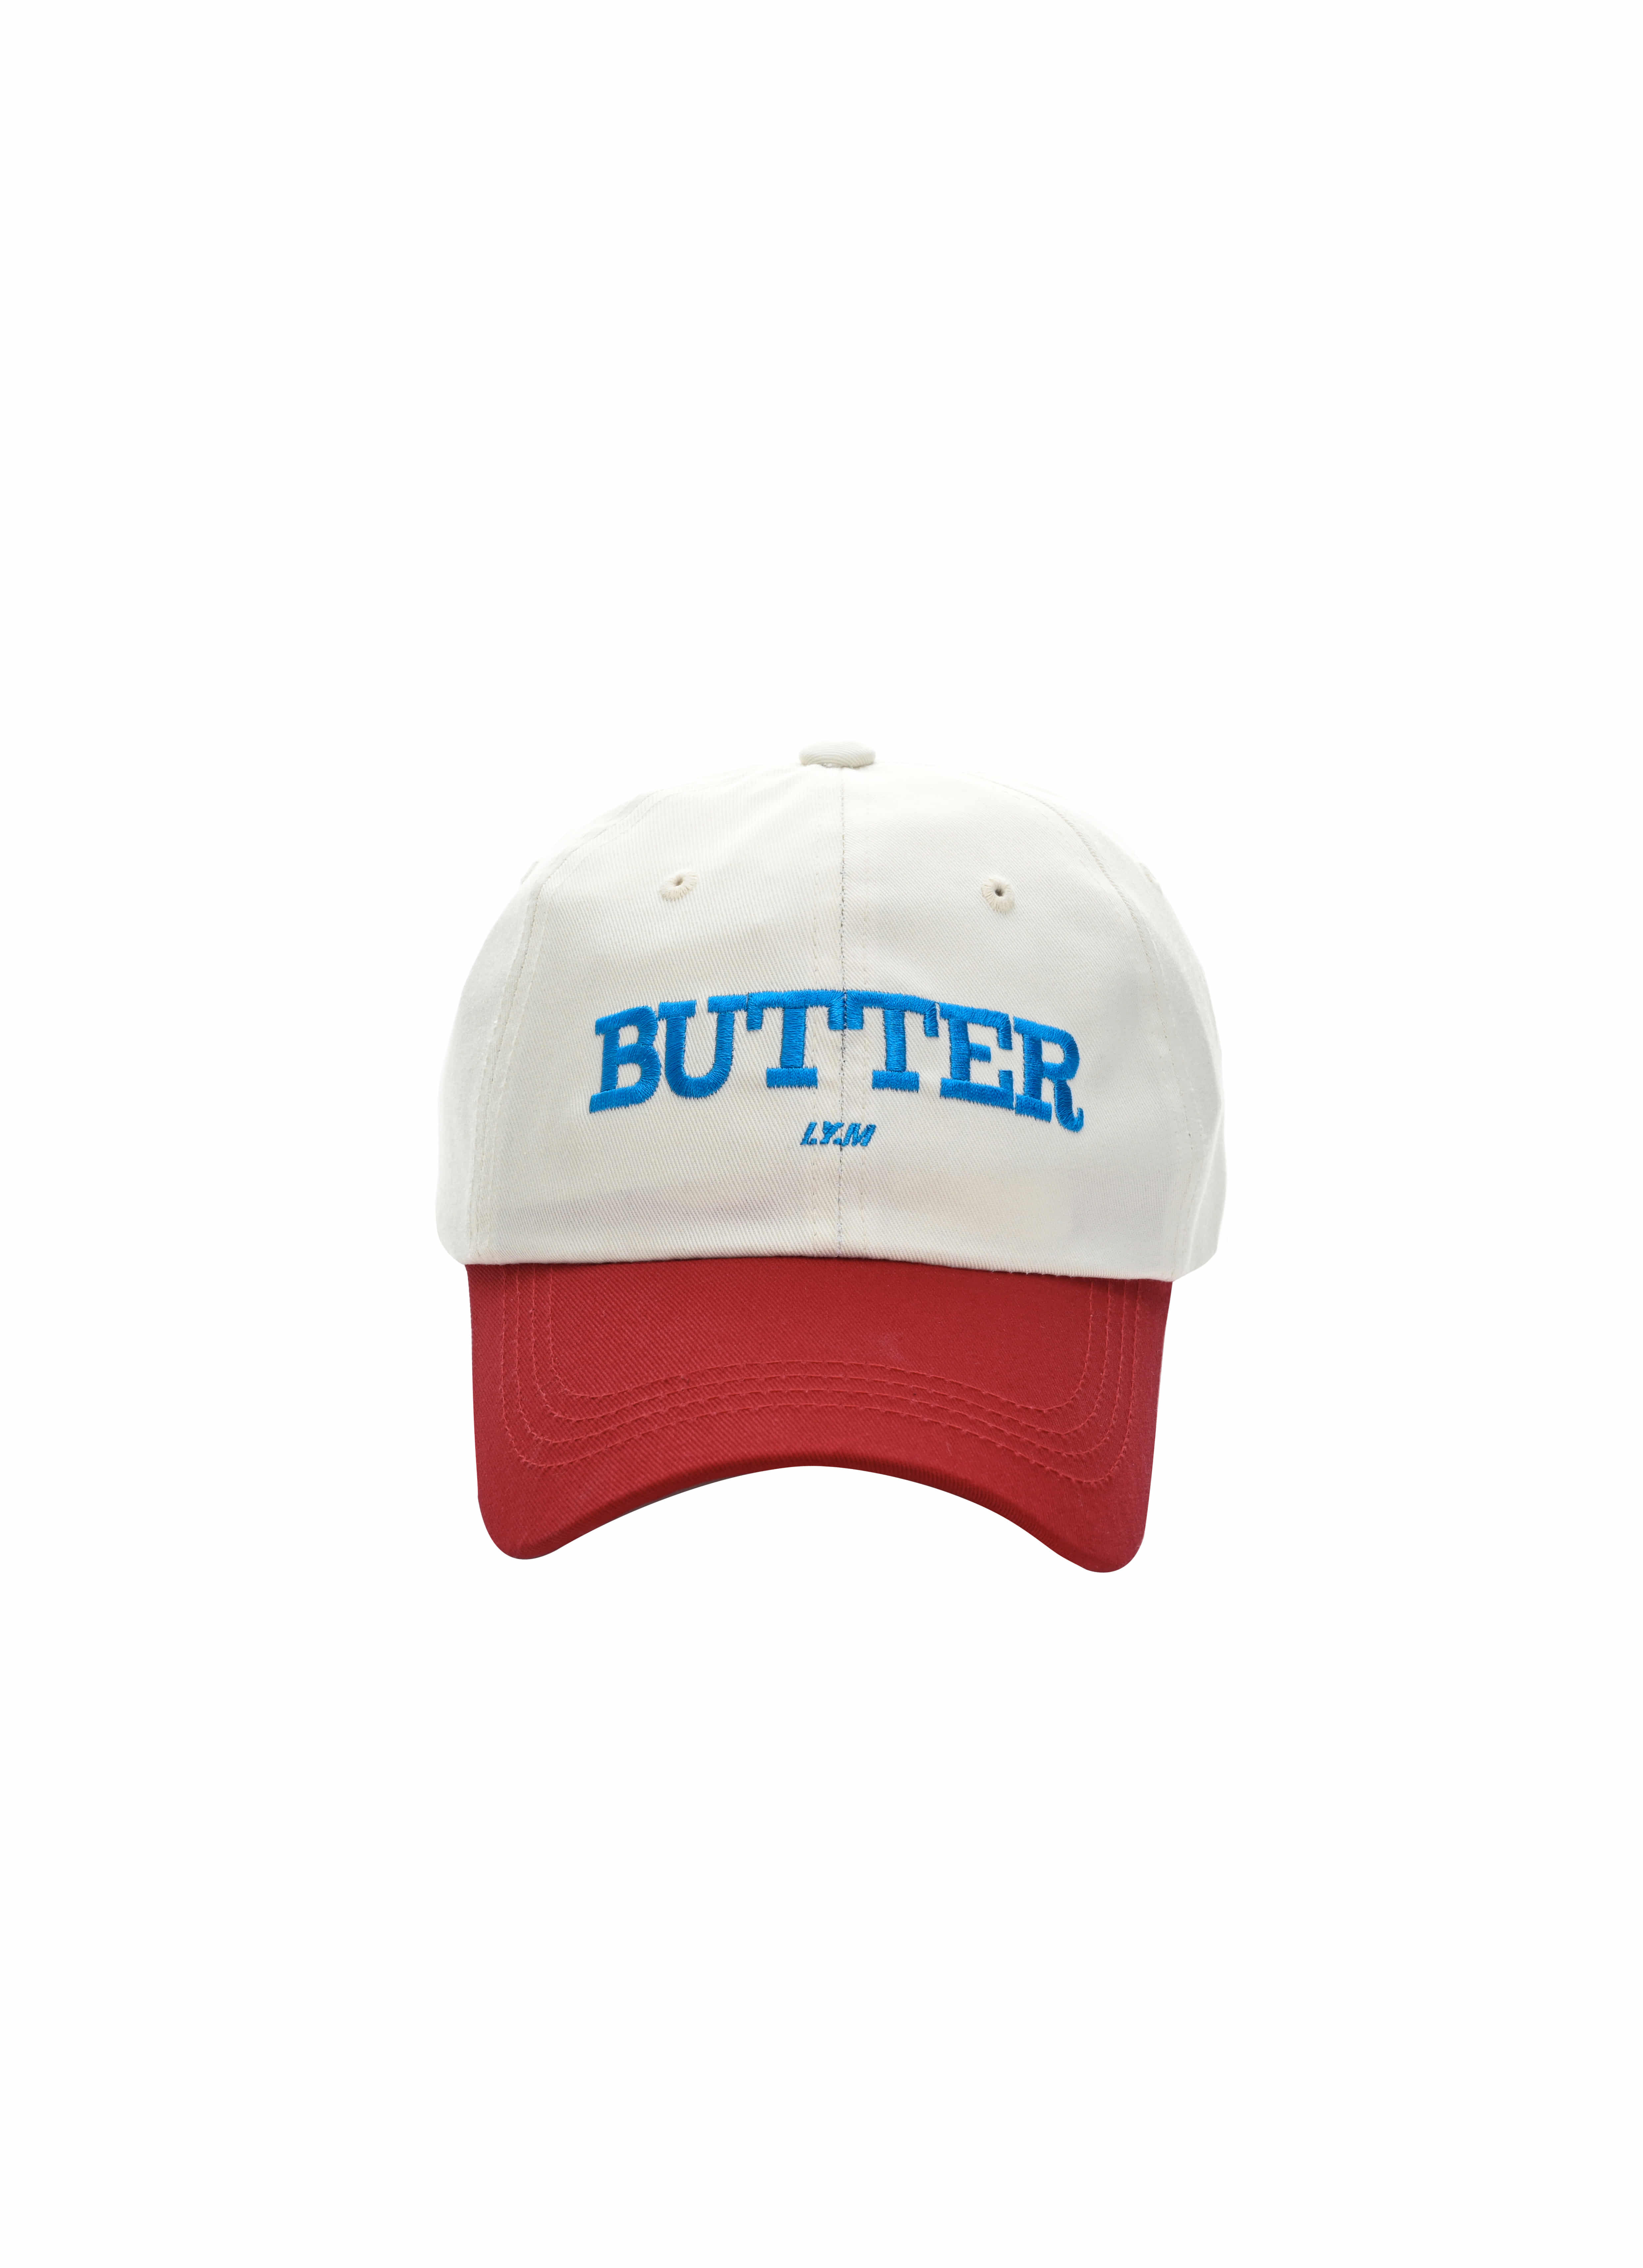 30%--butter cap(white &amp; red)